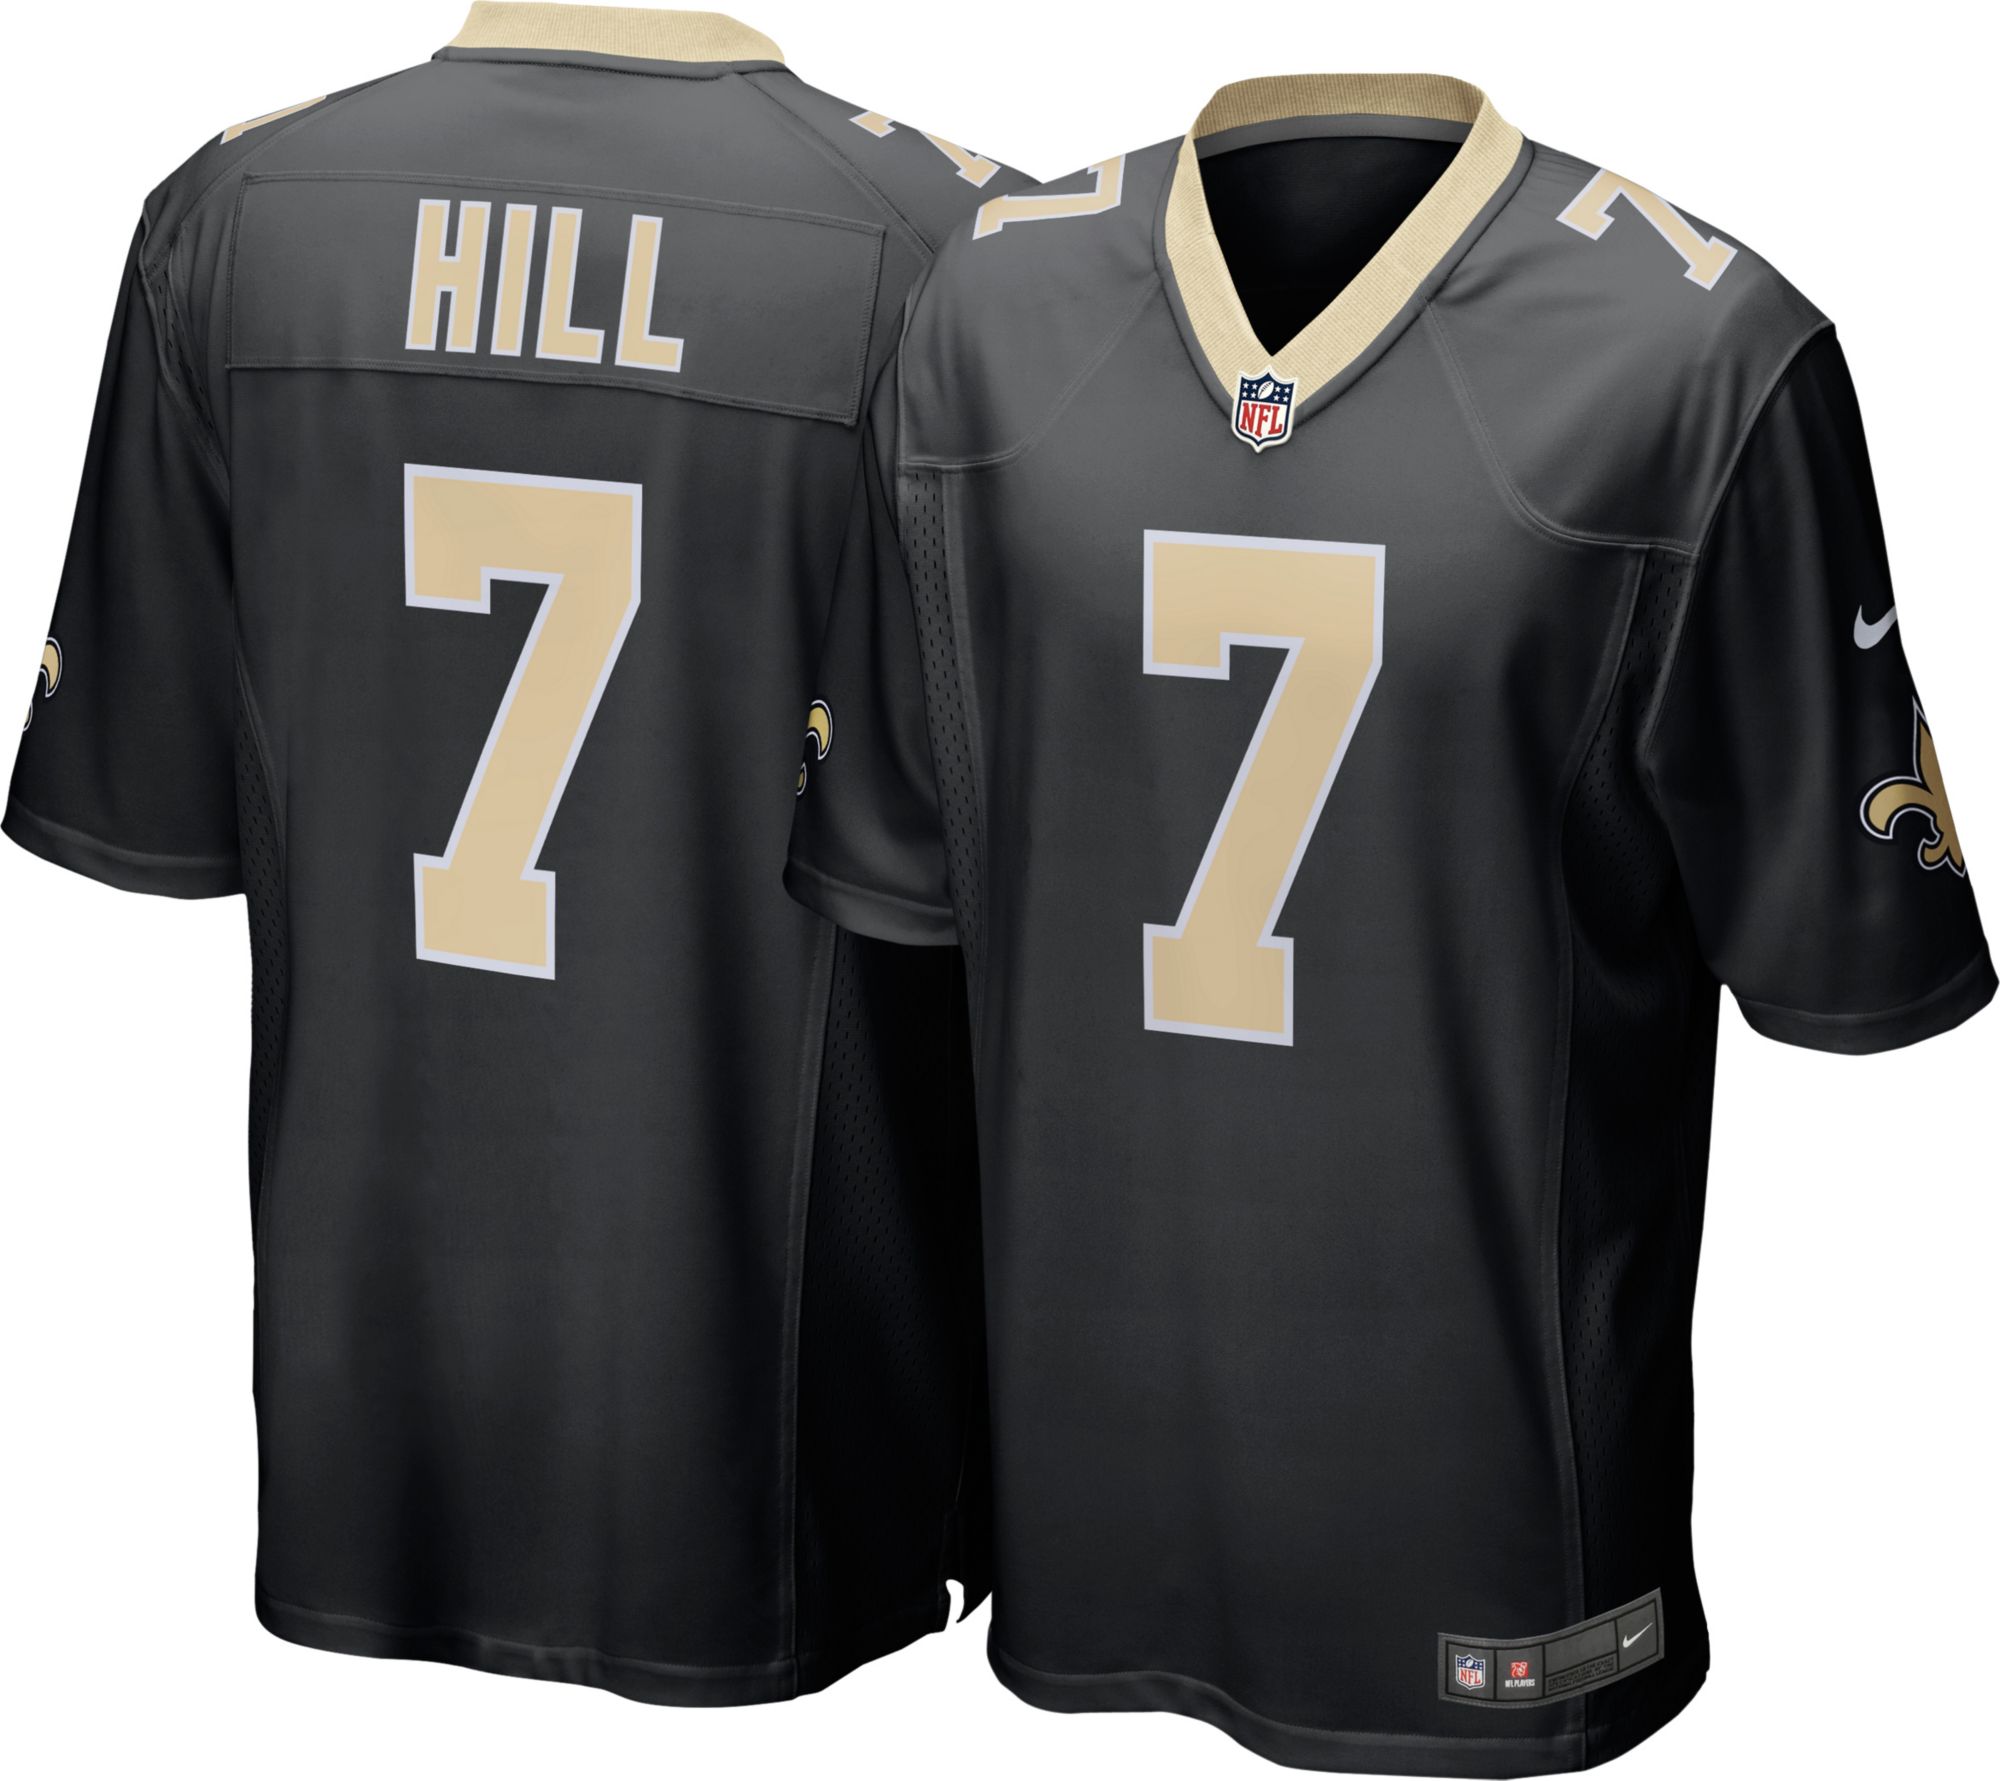 taysom hill white jersey